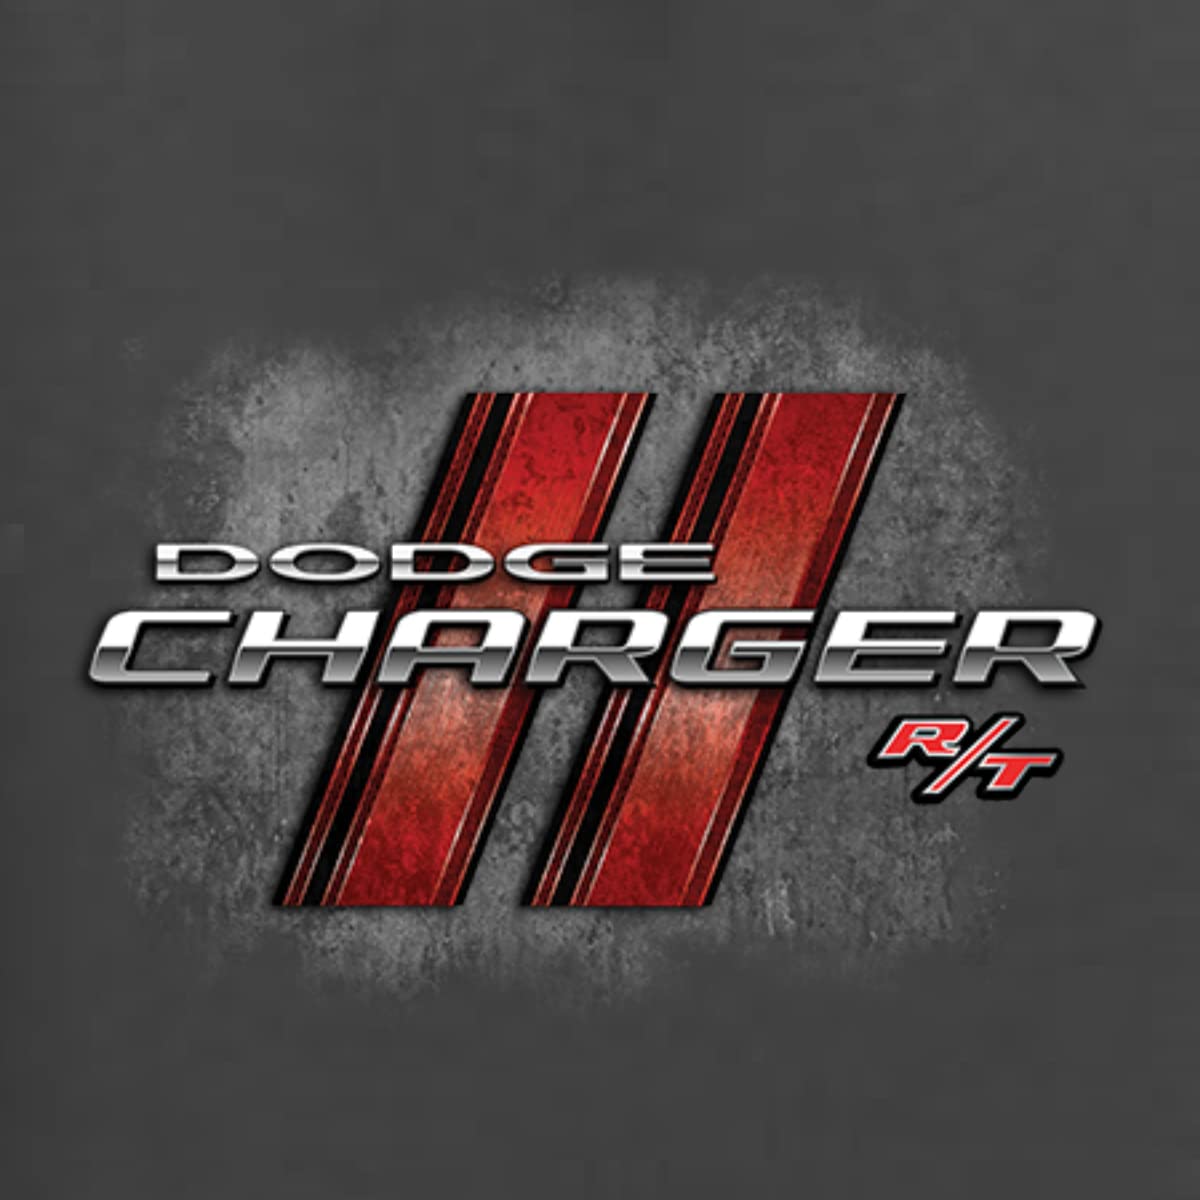 Dodge Charger R/T Classic Retro Racing Logo Emblem Cars and Trucks Men's Graphic T-Shirt, Charcoal, XX-Large